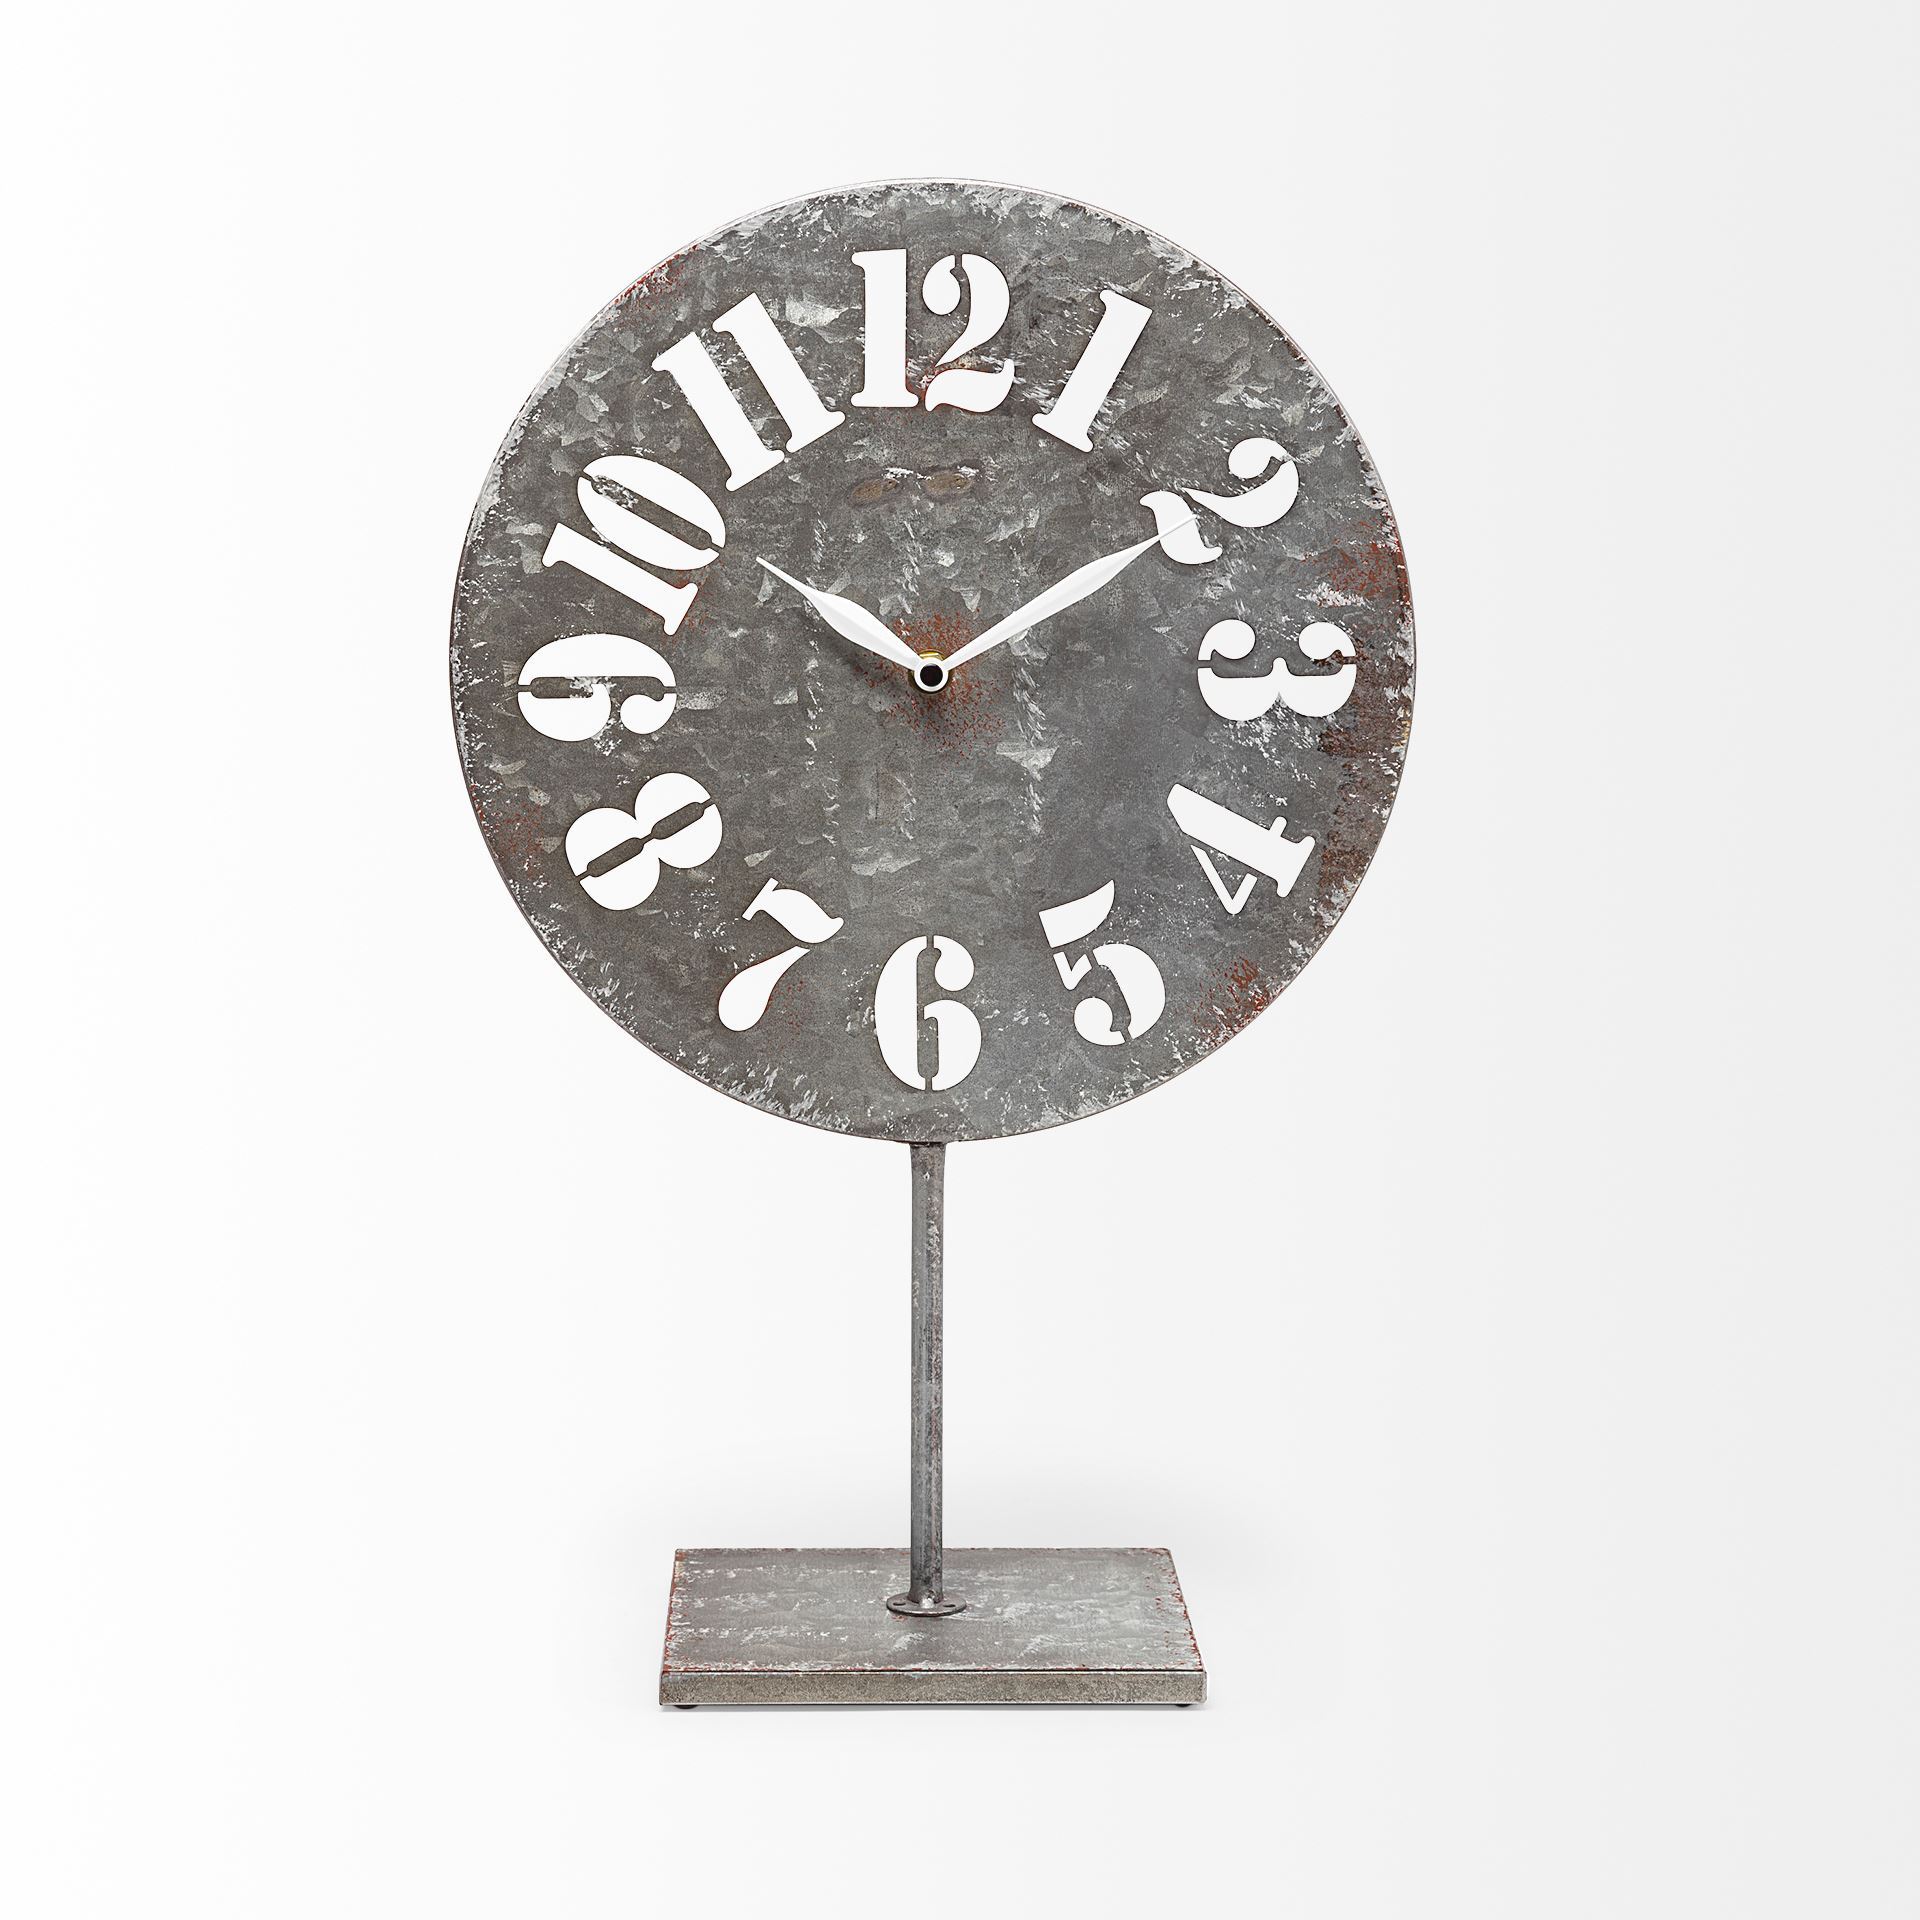 Rectangular Gray Table Clock with Cut Out Number and Distress Finish